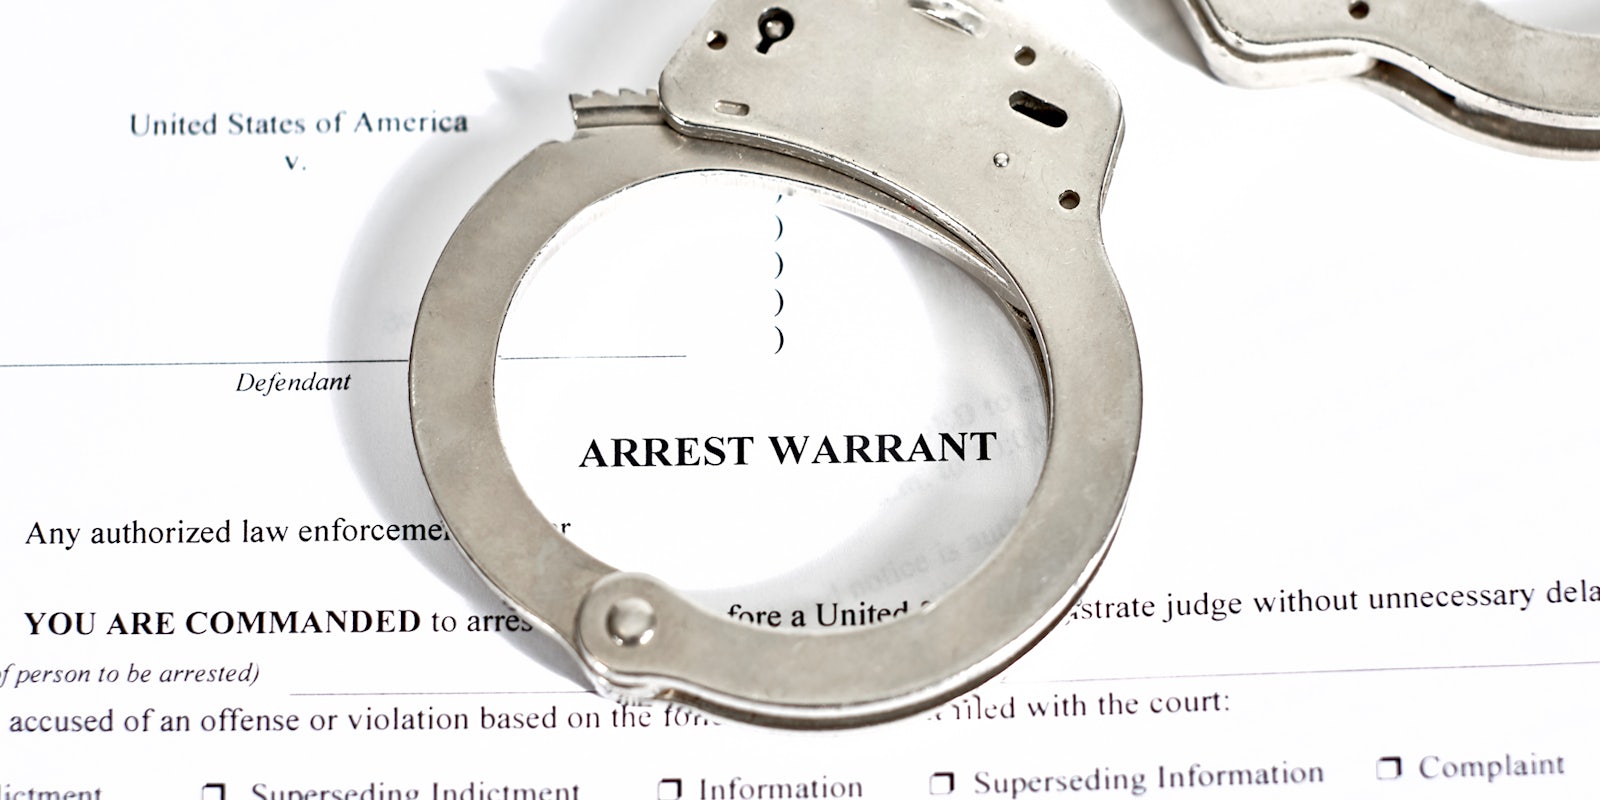 Arrest Warrant court papers with handcuffs on top